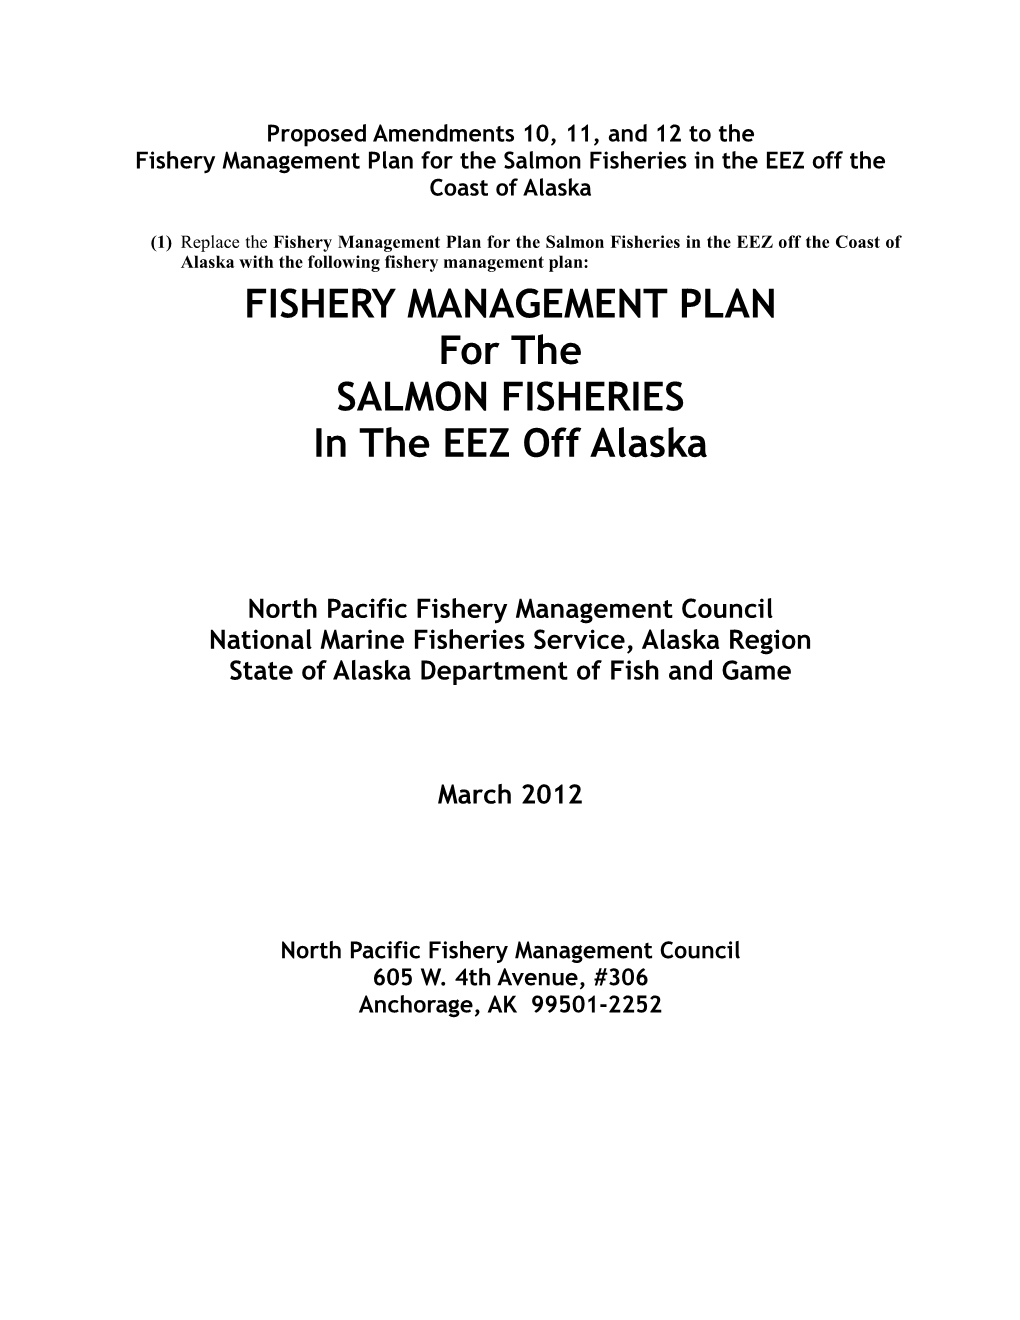 Proposed Amendments 10, 11, and 12 to the Fishery Management Plan for the Salmon Fisheries in the EEZ Off the Coast of Alaska